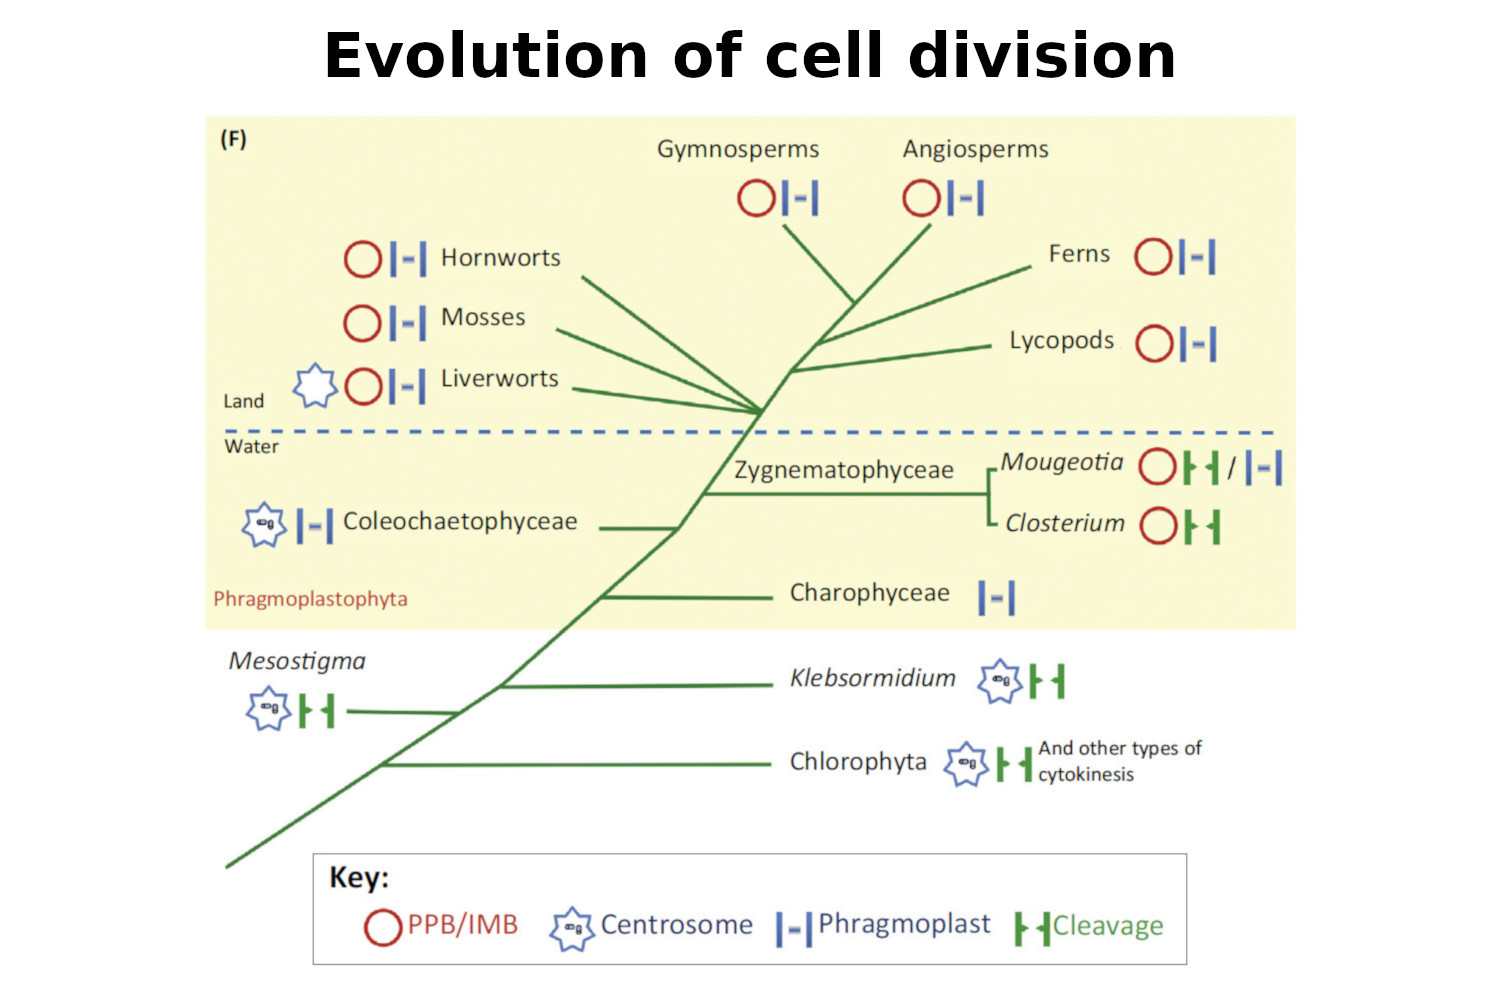 During the evolution from aquatic streptophyte algae to land plants, the mechanism of cell division changed from centripetal to centrifugal cytokinesis relying on the phragmoplast, an evolutionary novelty. <br> Buschmann and Zachgo; Trends in Plant Science, 2016